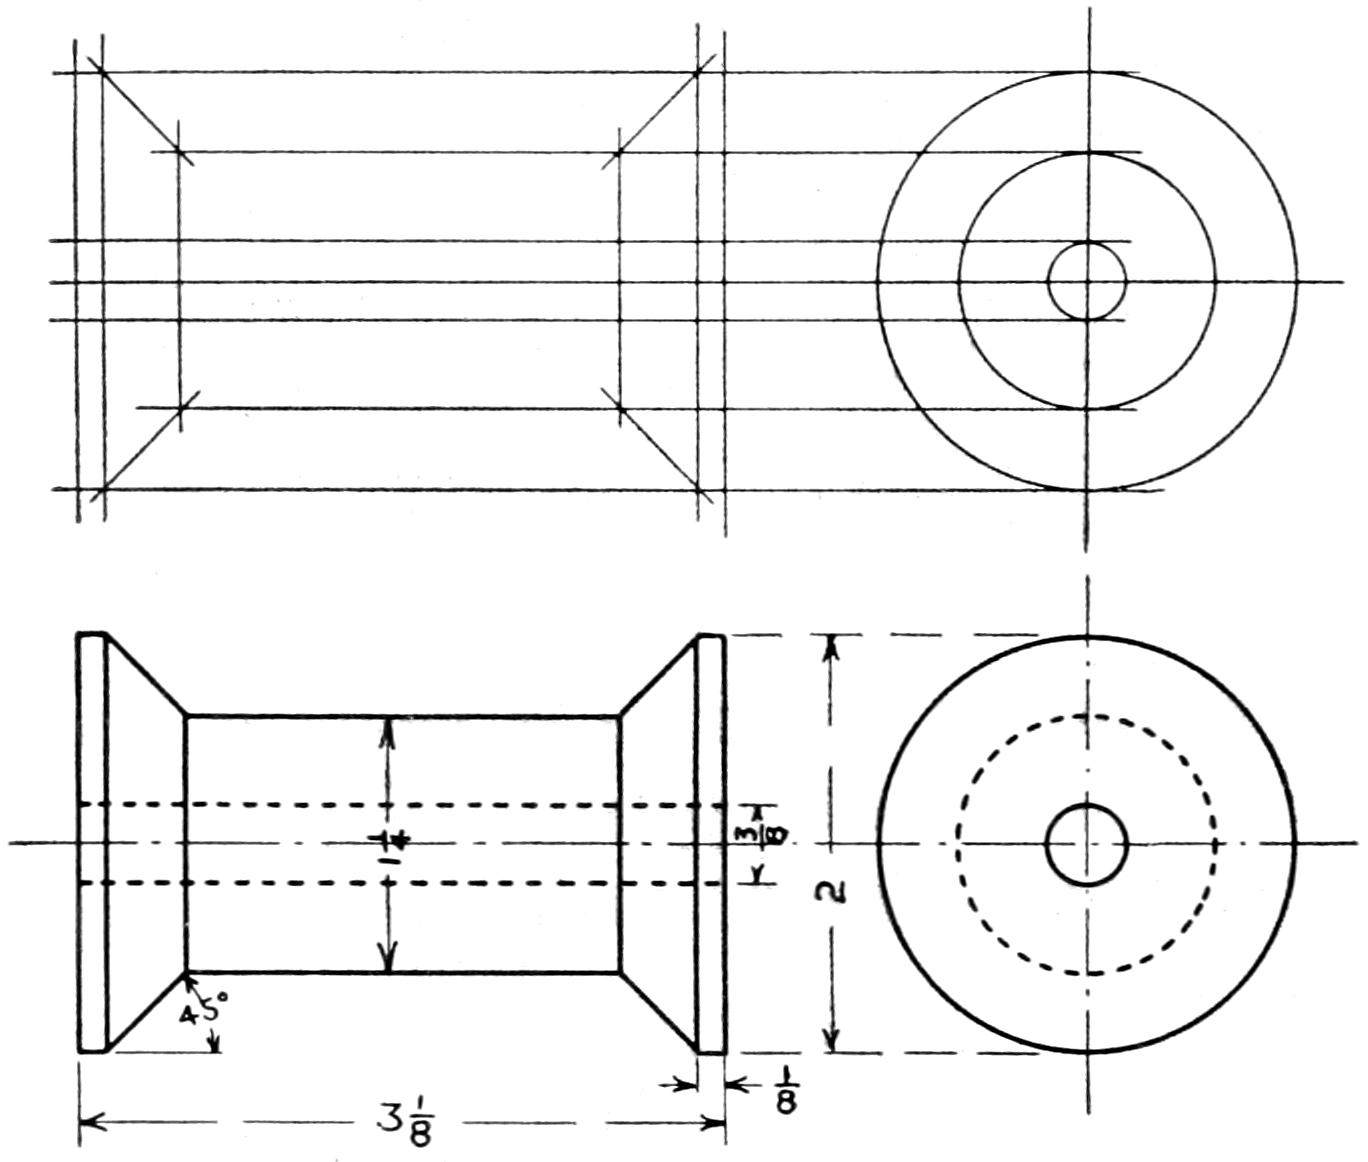 Technical drawing of wooden spool